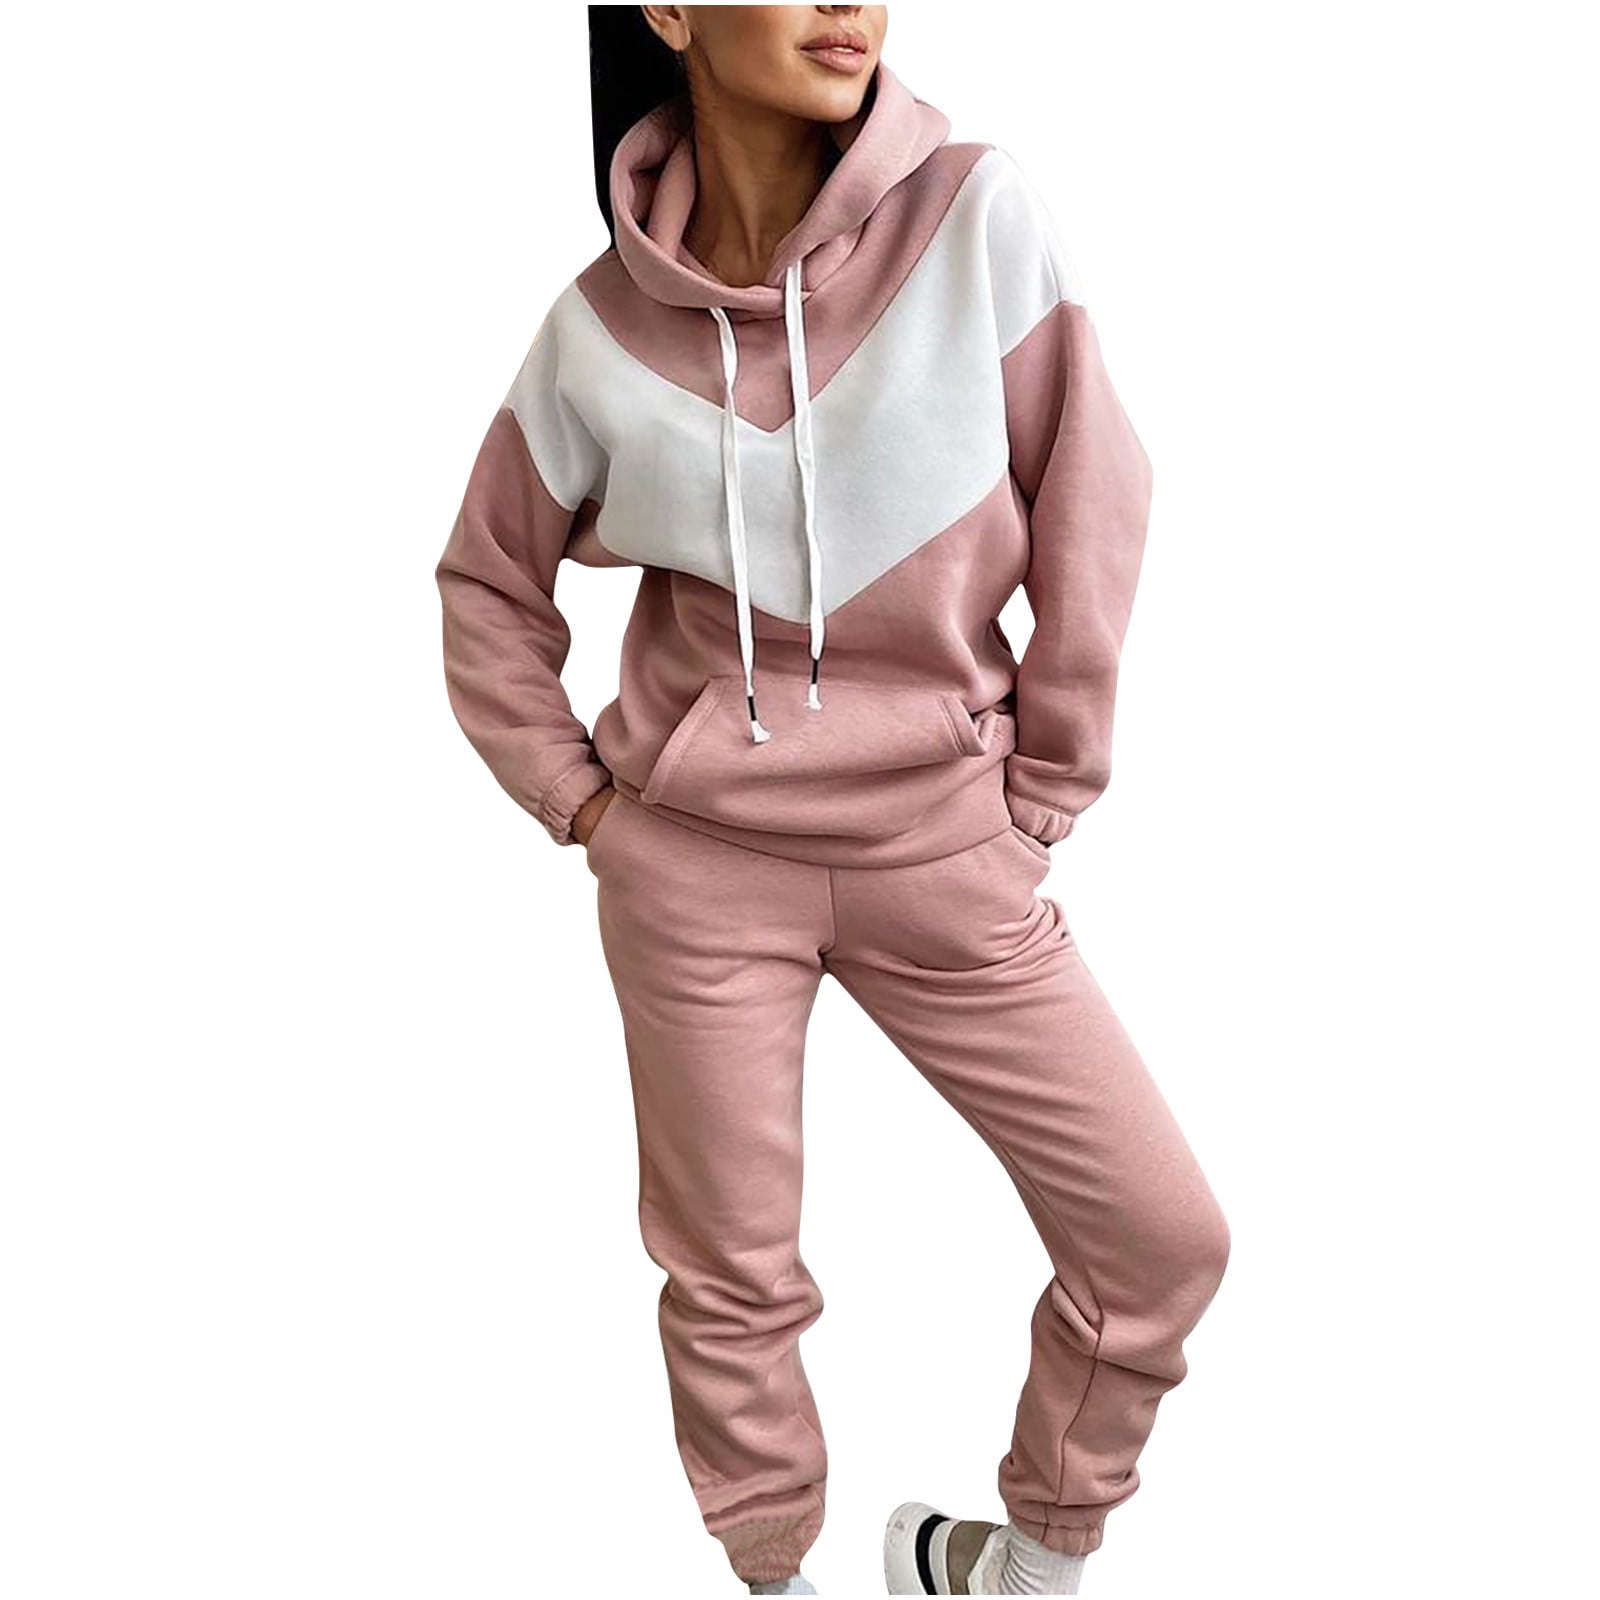 AOOCHASLIY Sweat Suits for Women Clearance Jogging Suits Fashion